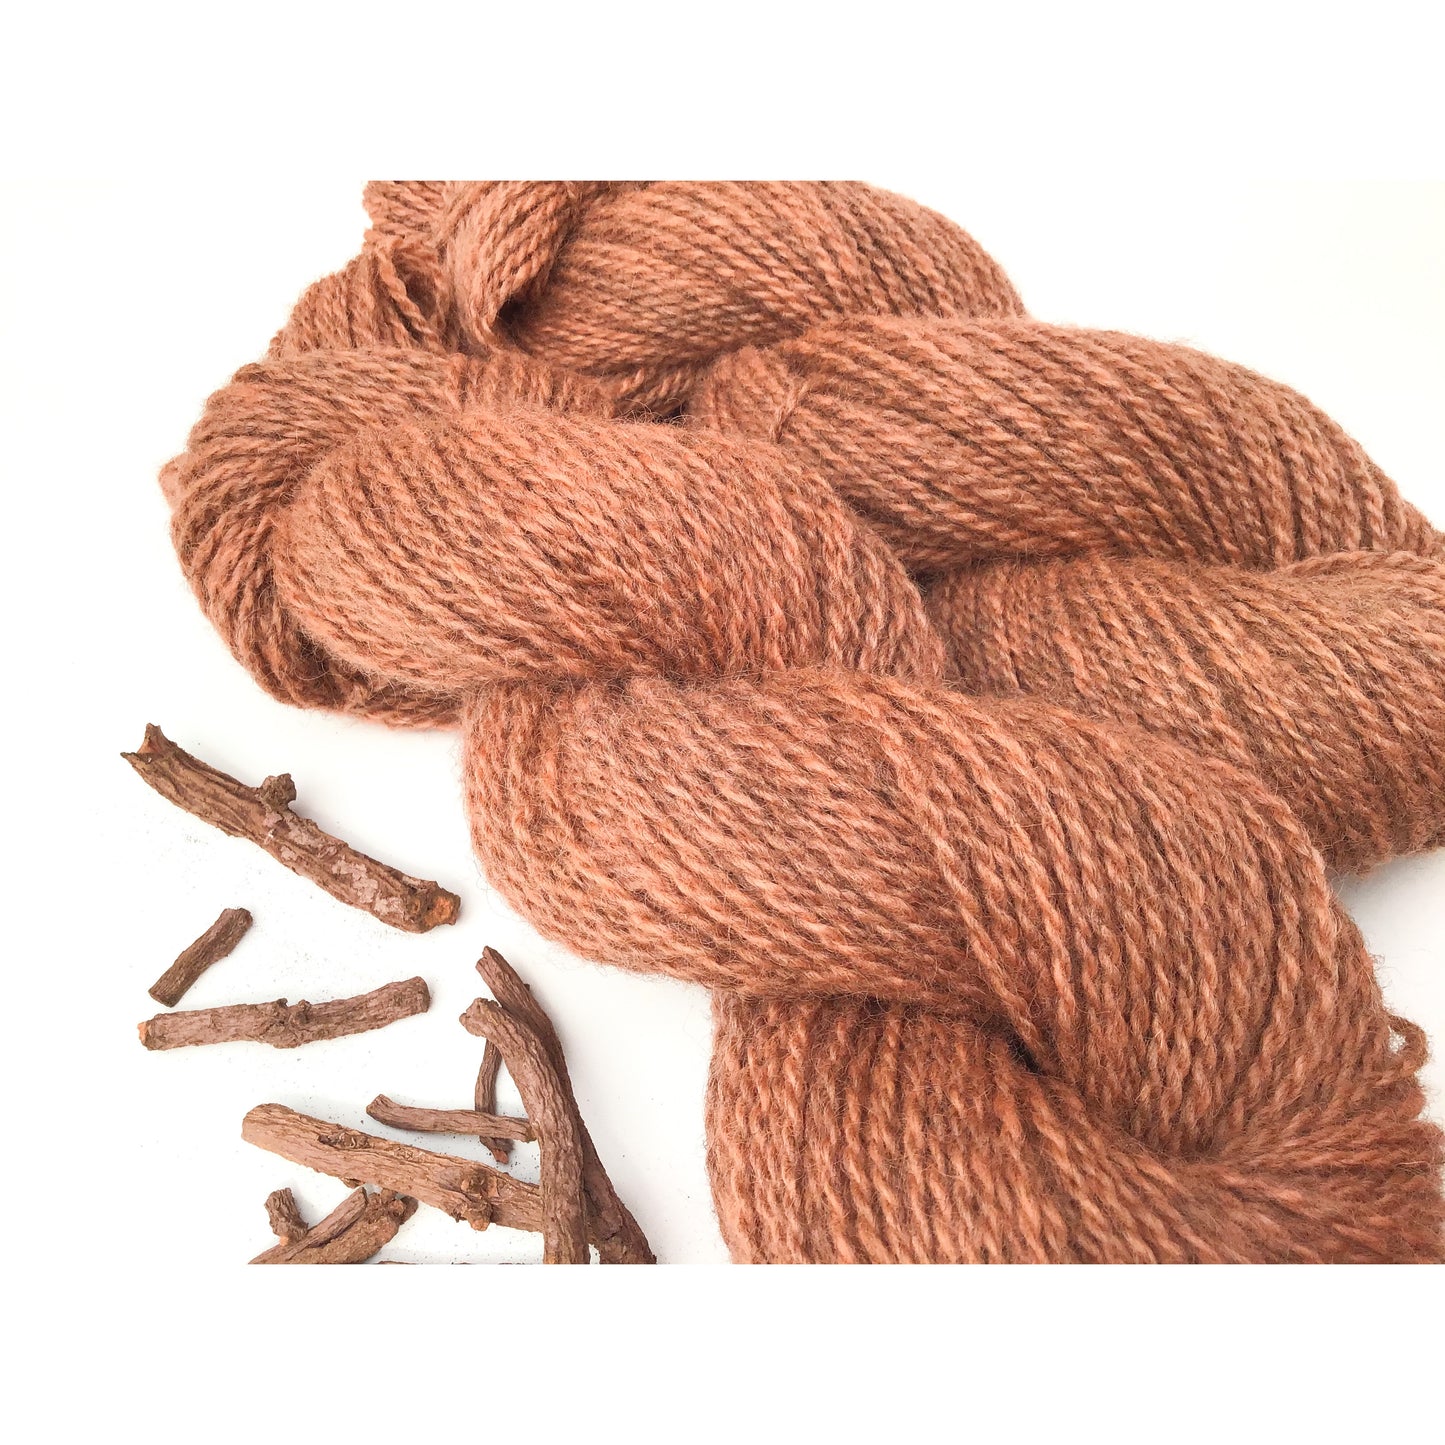 Madder Root Dyed Wool Yarn - Plant Dyed Wool Yarn 2-Ply - Worsted Weight 3.75 oz